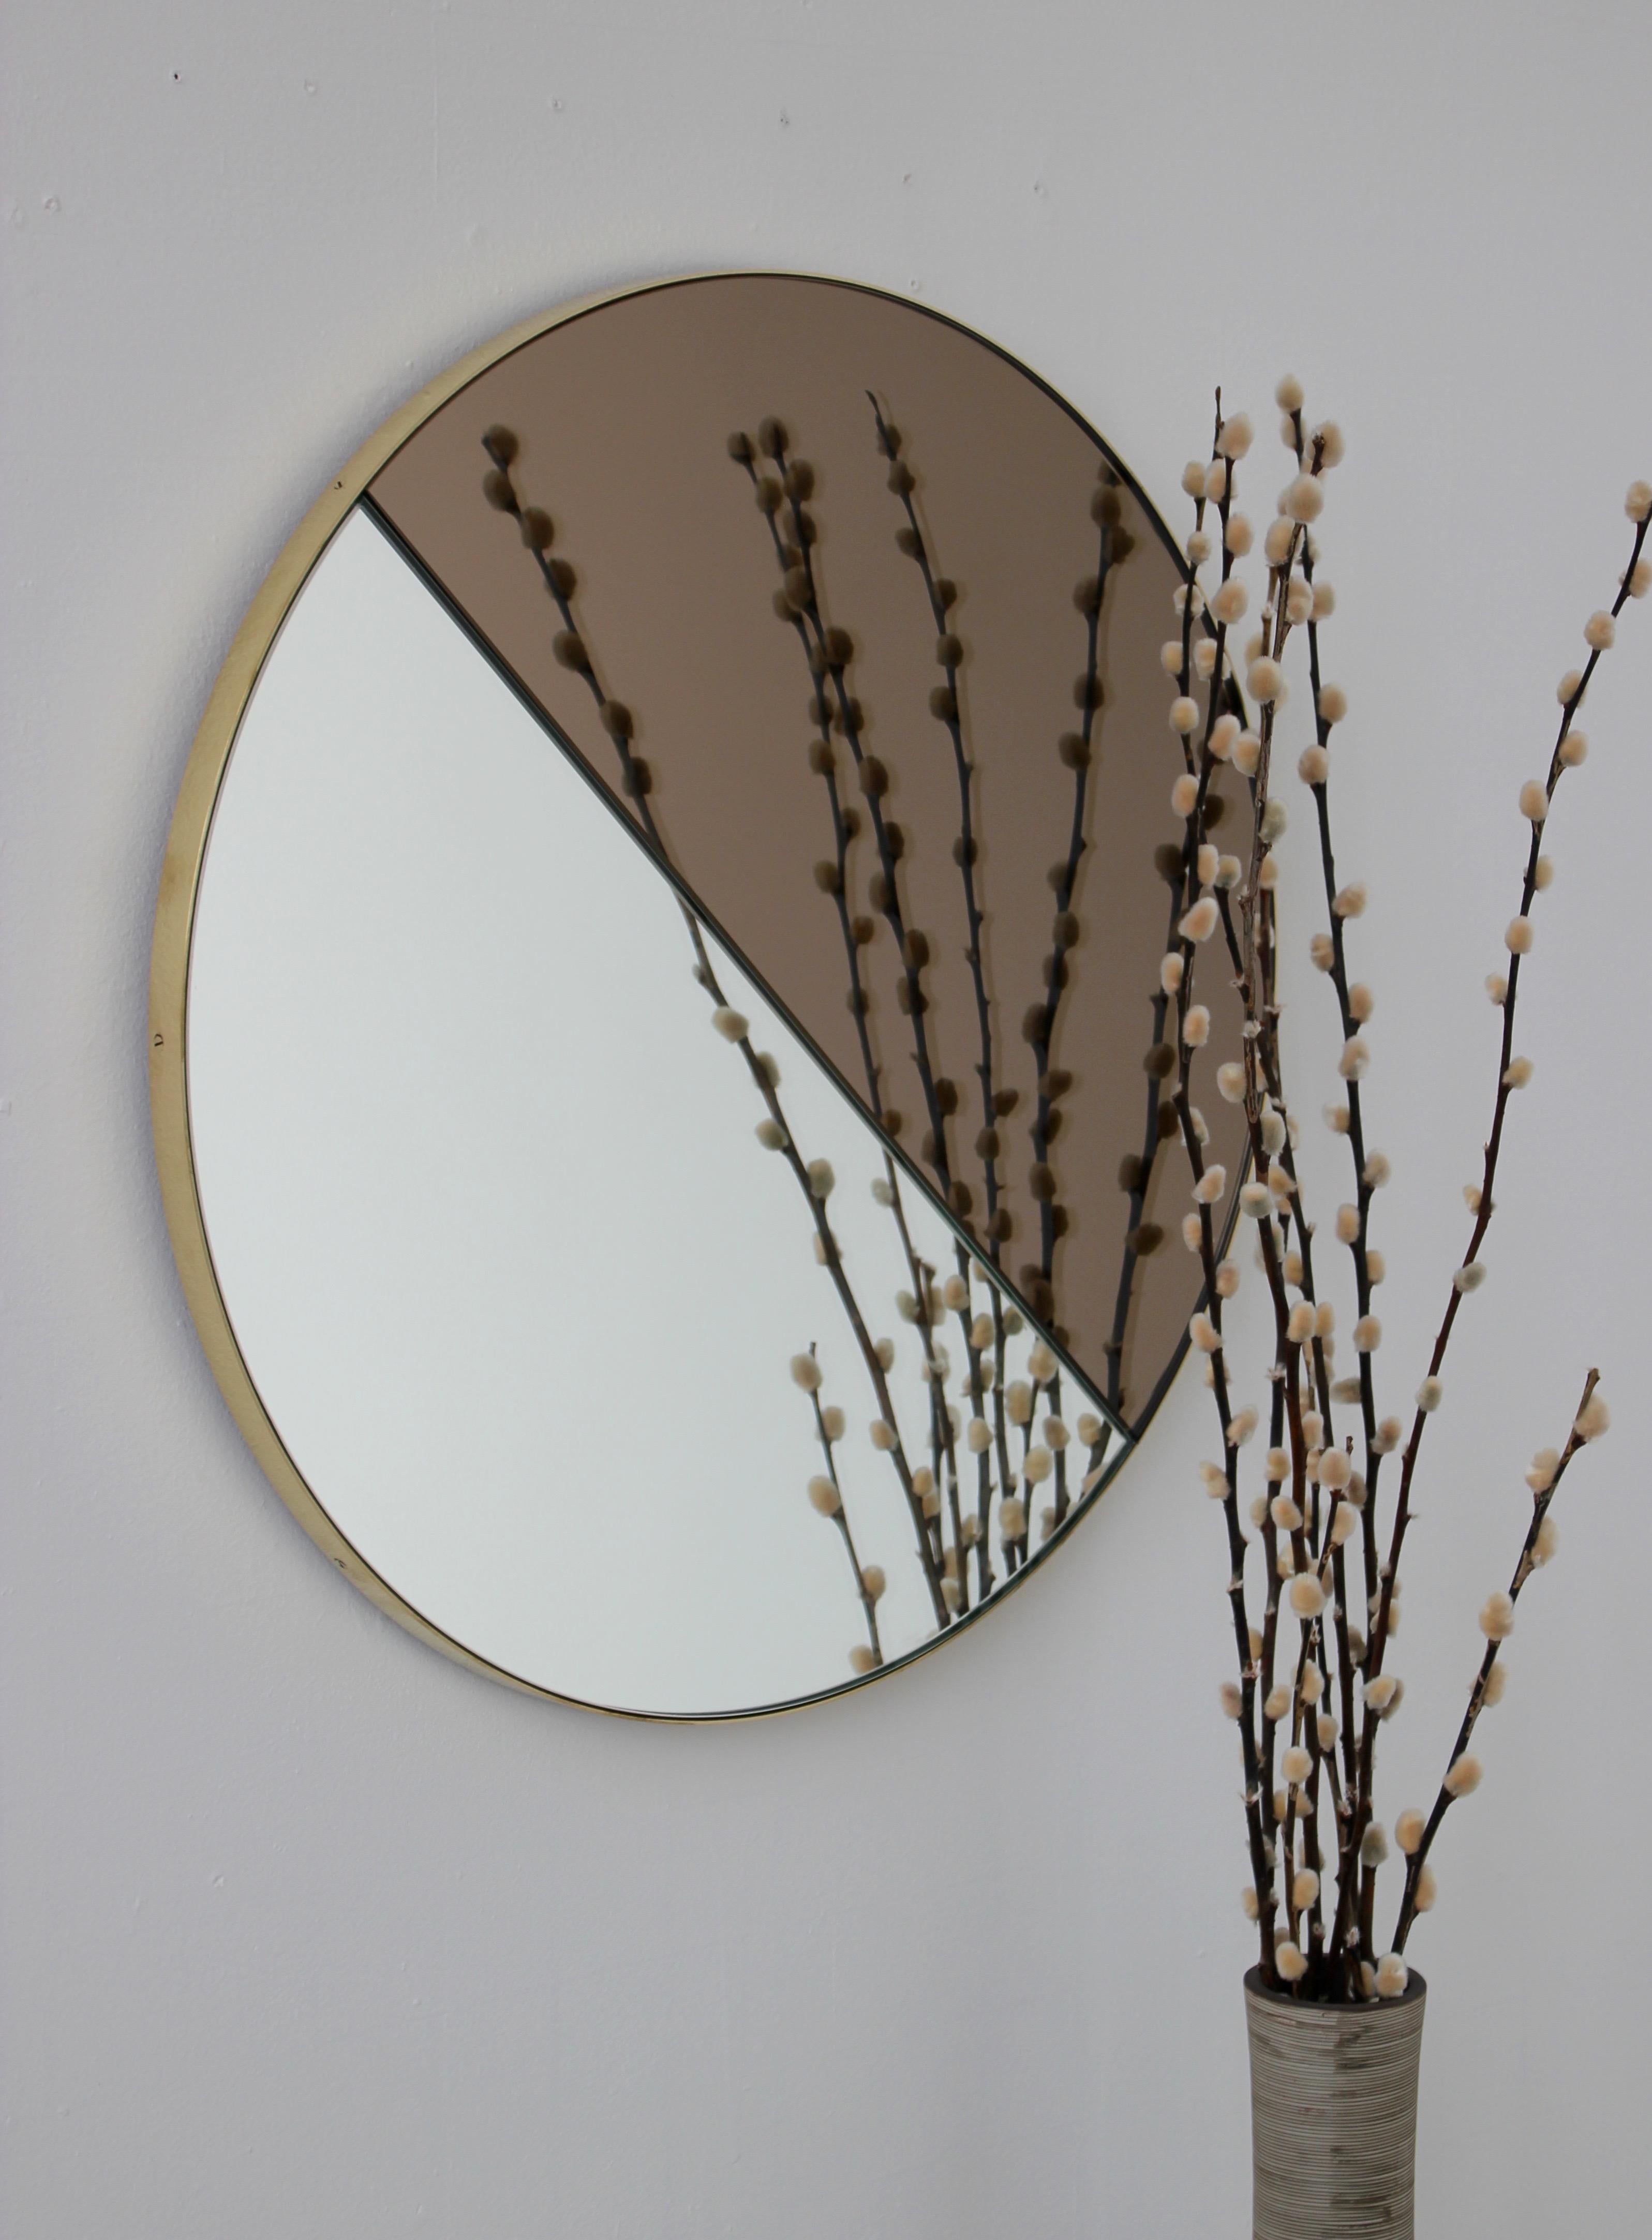 Brushed Orbis Dualis Mixed Silver + Bronze Round Mirror with Brass Frame, Medium For Sale